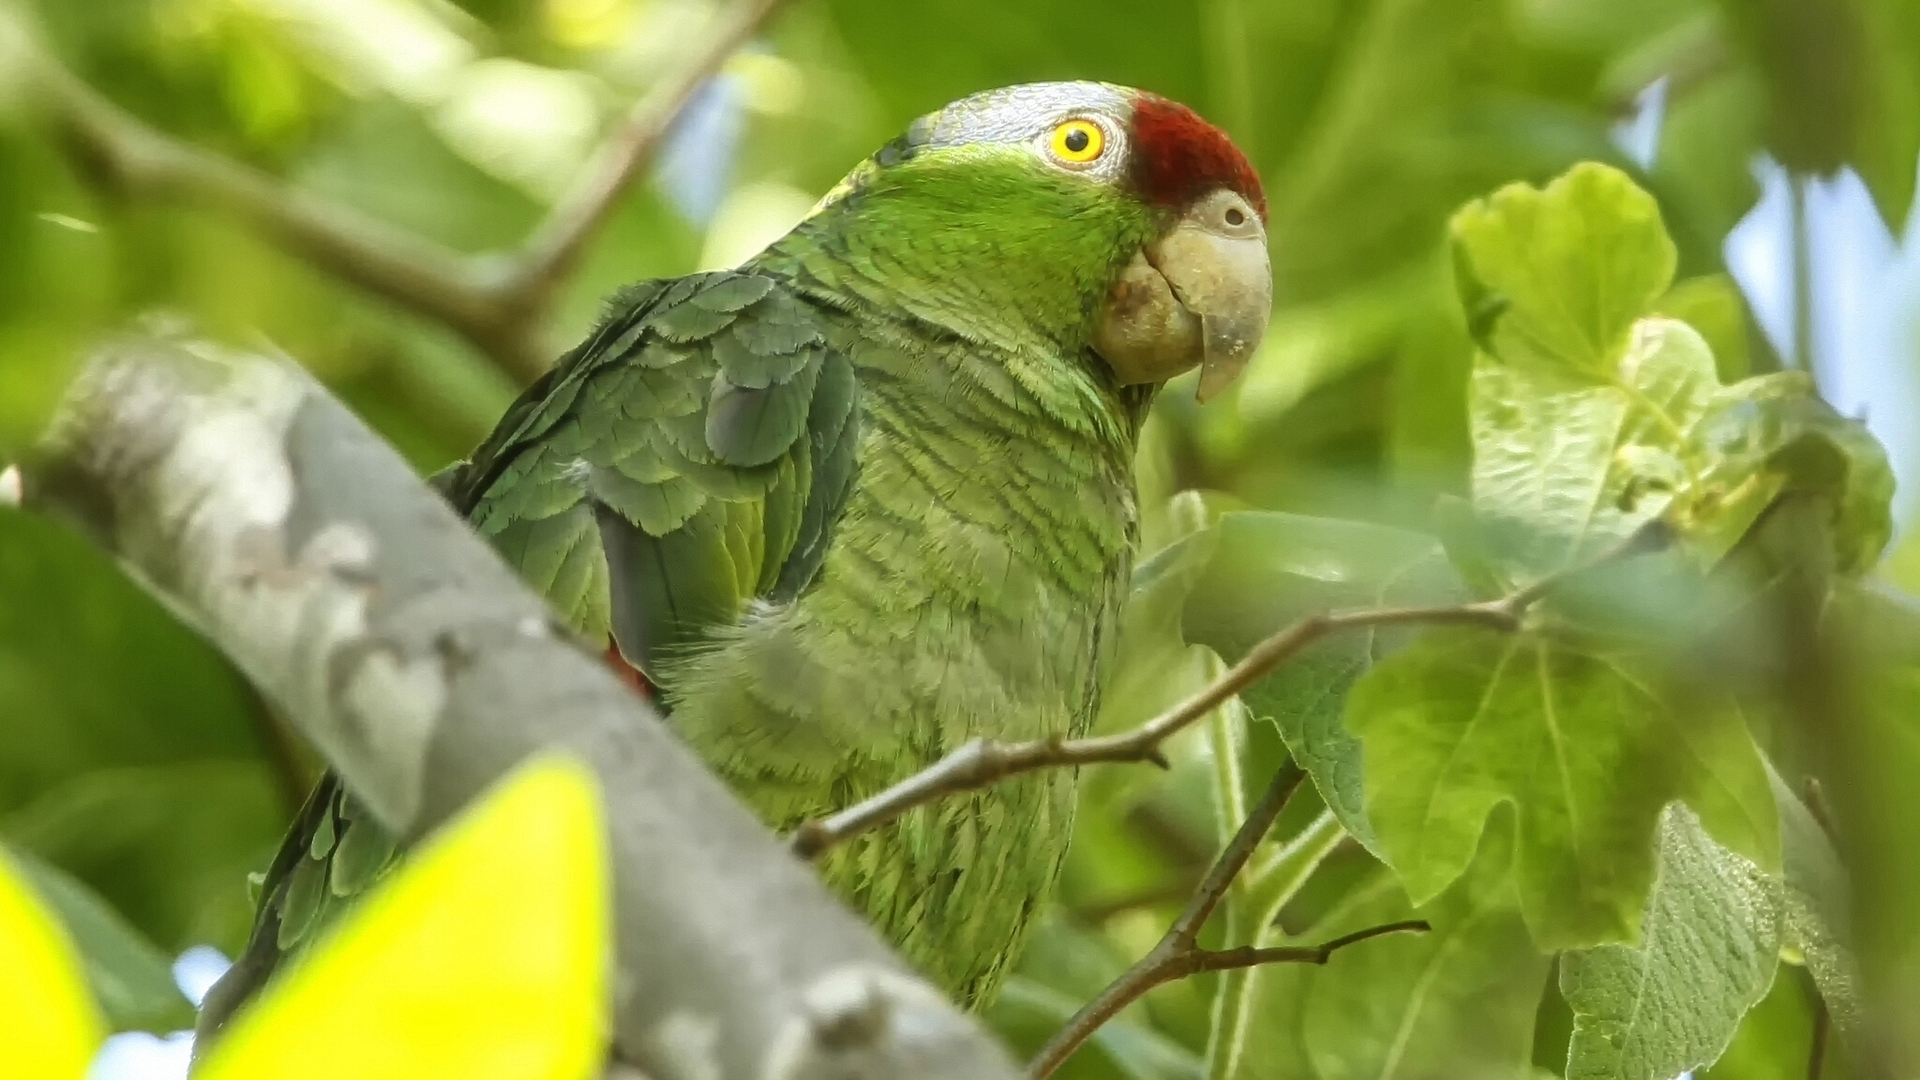 Exotic Green Parrot for 1920 x 1080 HDTV 1080p resolution